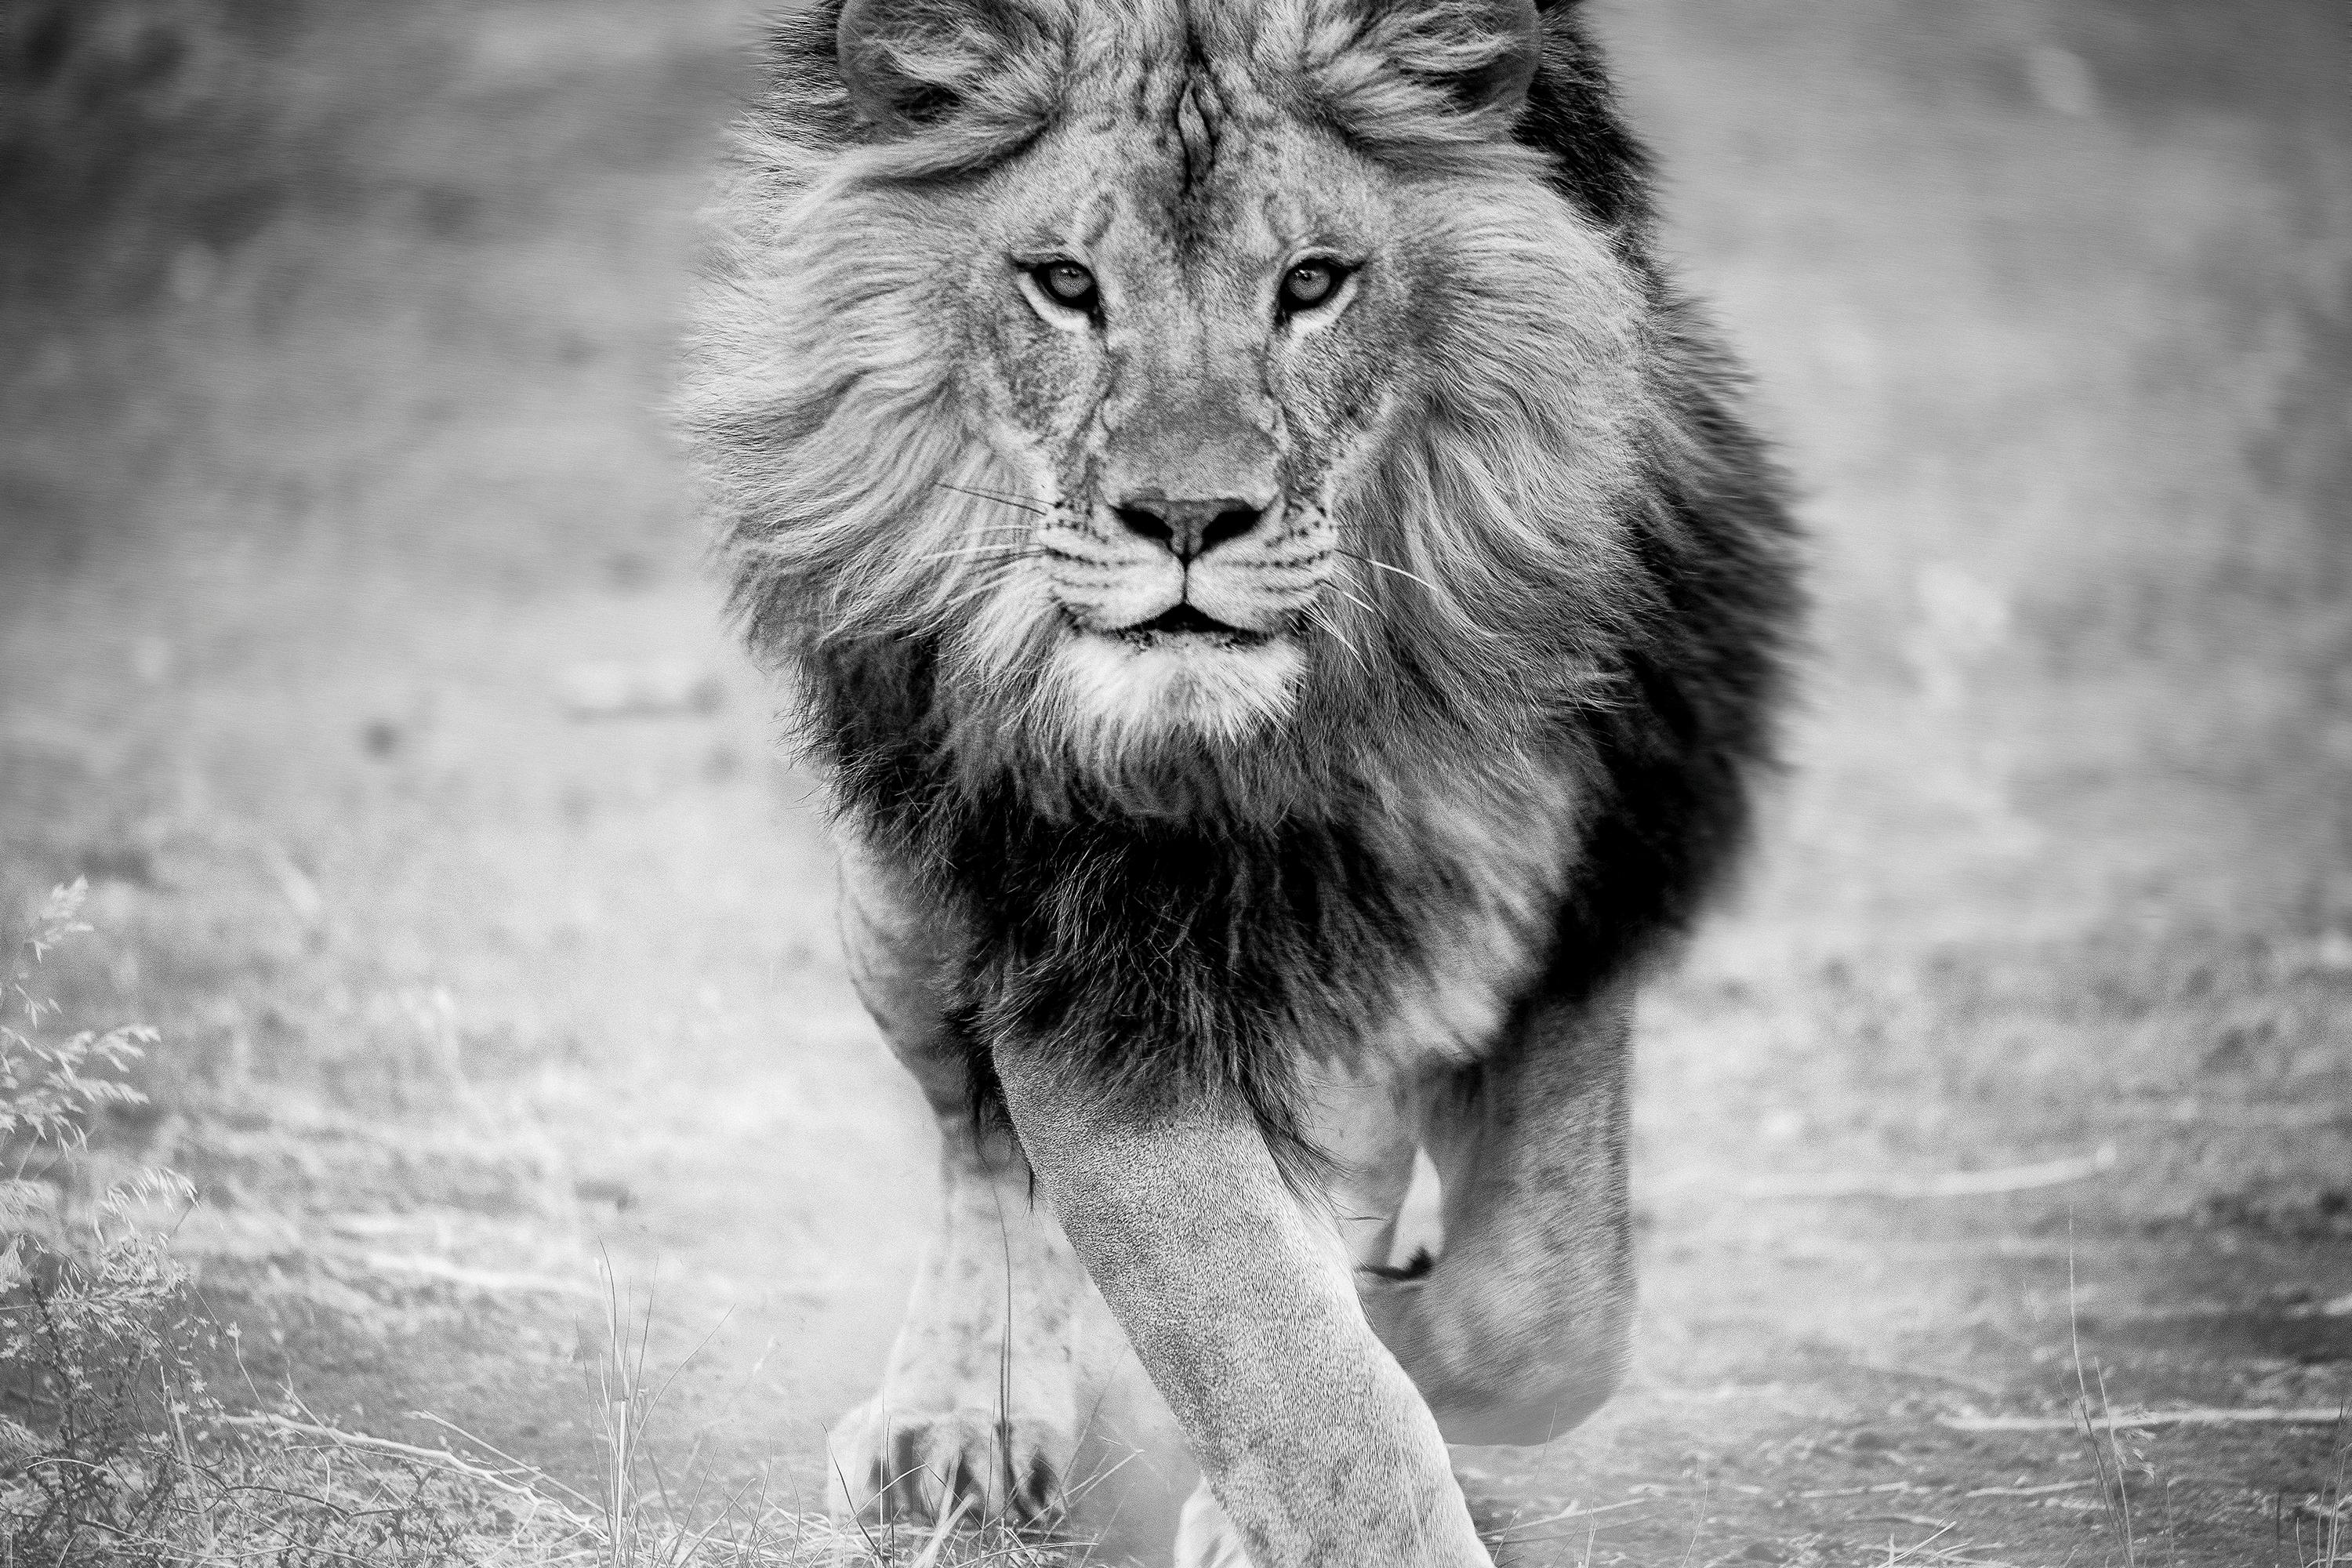 Shane Russeck Animal Print - "Panthera Leo"36x48 Black and White Lion Photography Unsigned Test Print Africa 